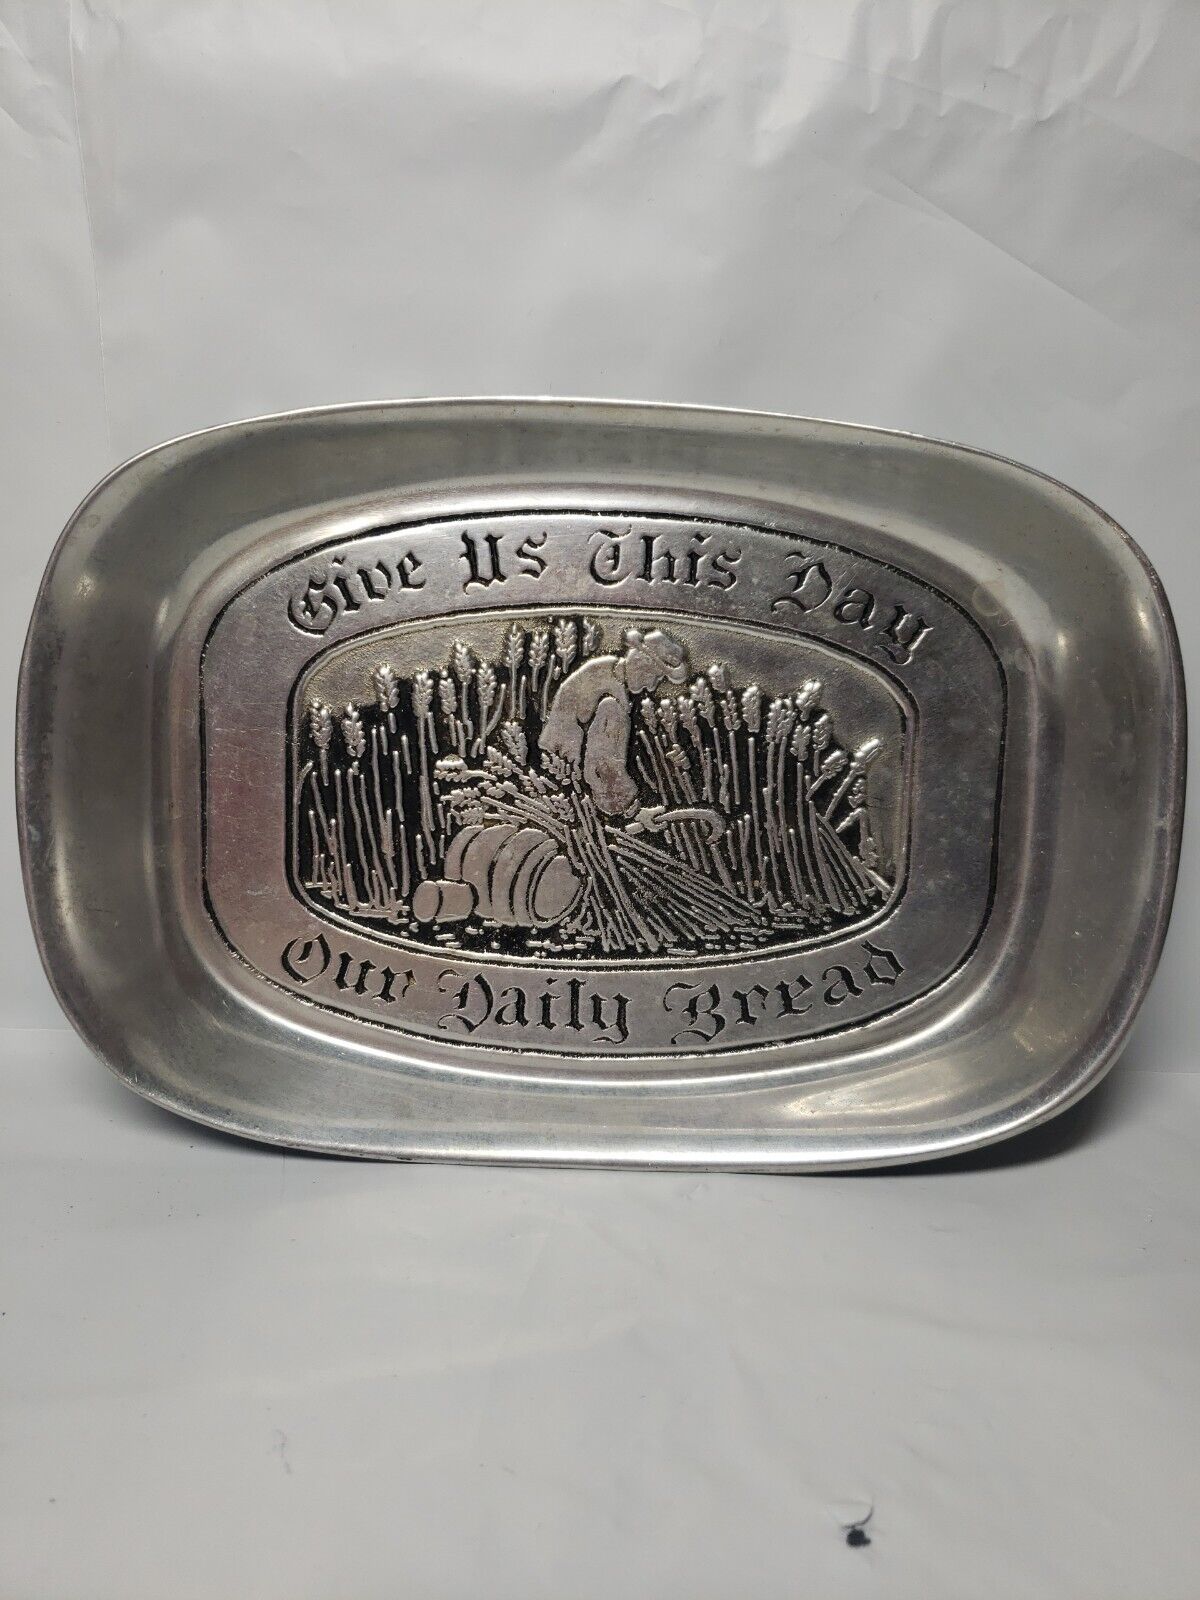 Duratale Pewter 'Give Us This Day Our Daily Bread' Bread Tray by wilton